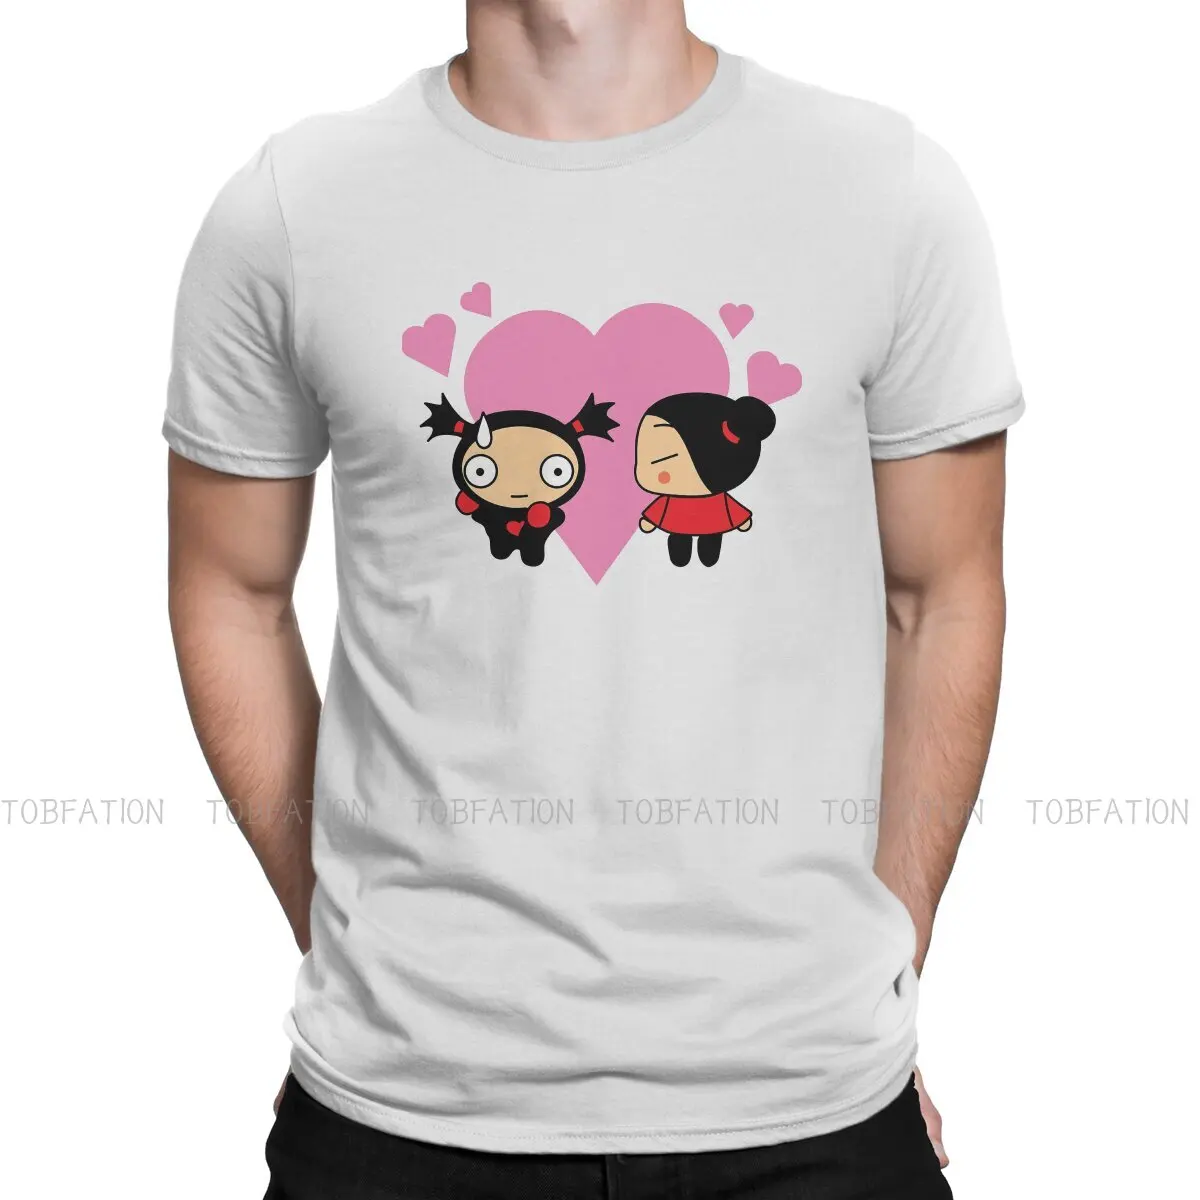 

Falling in Love Unique TShirt Pucca China Doll Comfortable Hip Hop Gift Idea T Shirt Stuff Hot Sale